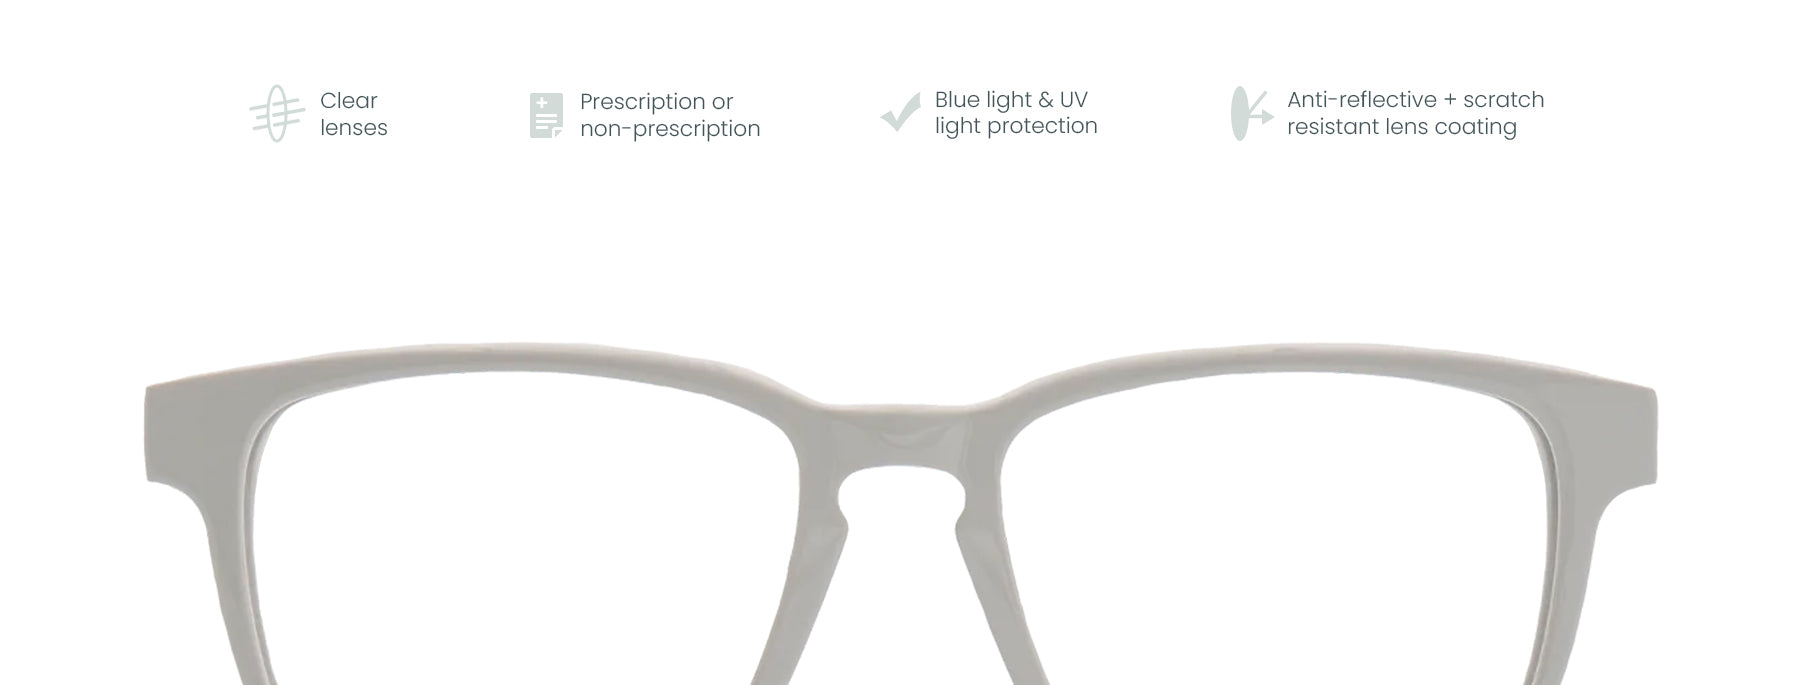 Clear lens eyeglasses with blue light protection available in prescription and non-prescription at www.HonestEyecare.org